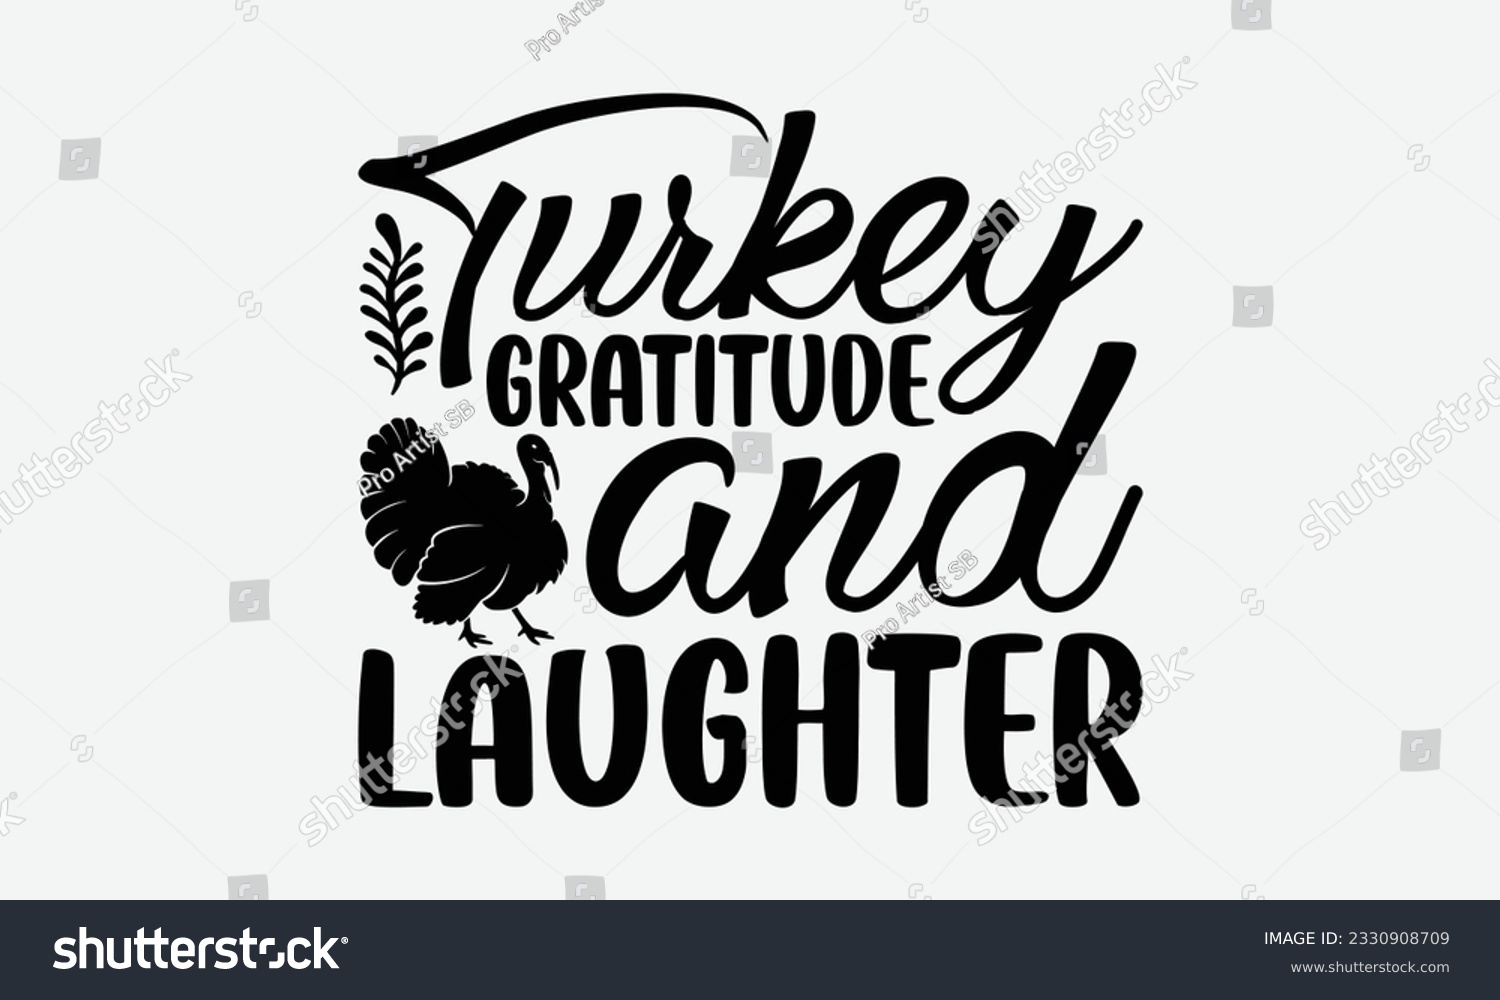 SVG of Turkey Gratitude And Laughter - Thanksgiving T-shirt Design Template, Happy Turkey Day SVG Quotes, Hand Drawn Lettering Phrase Isolated On White Background. svg